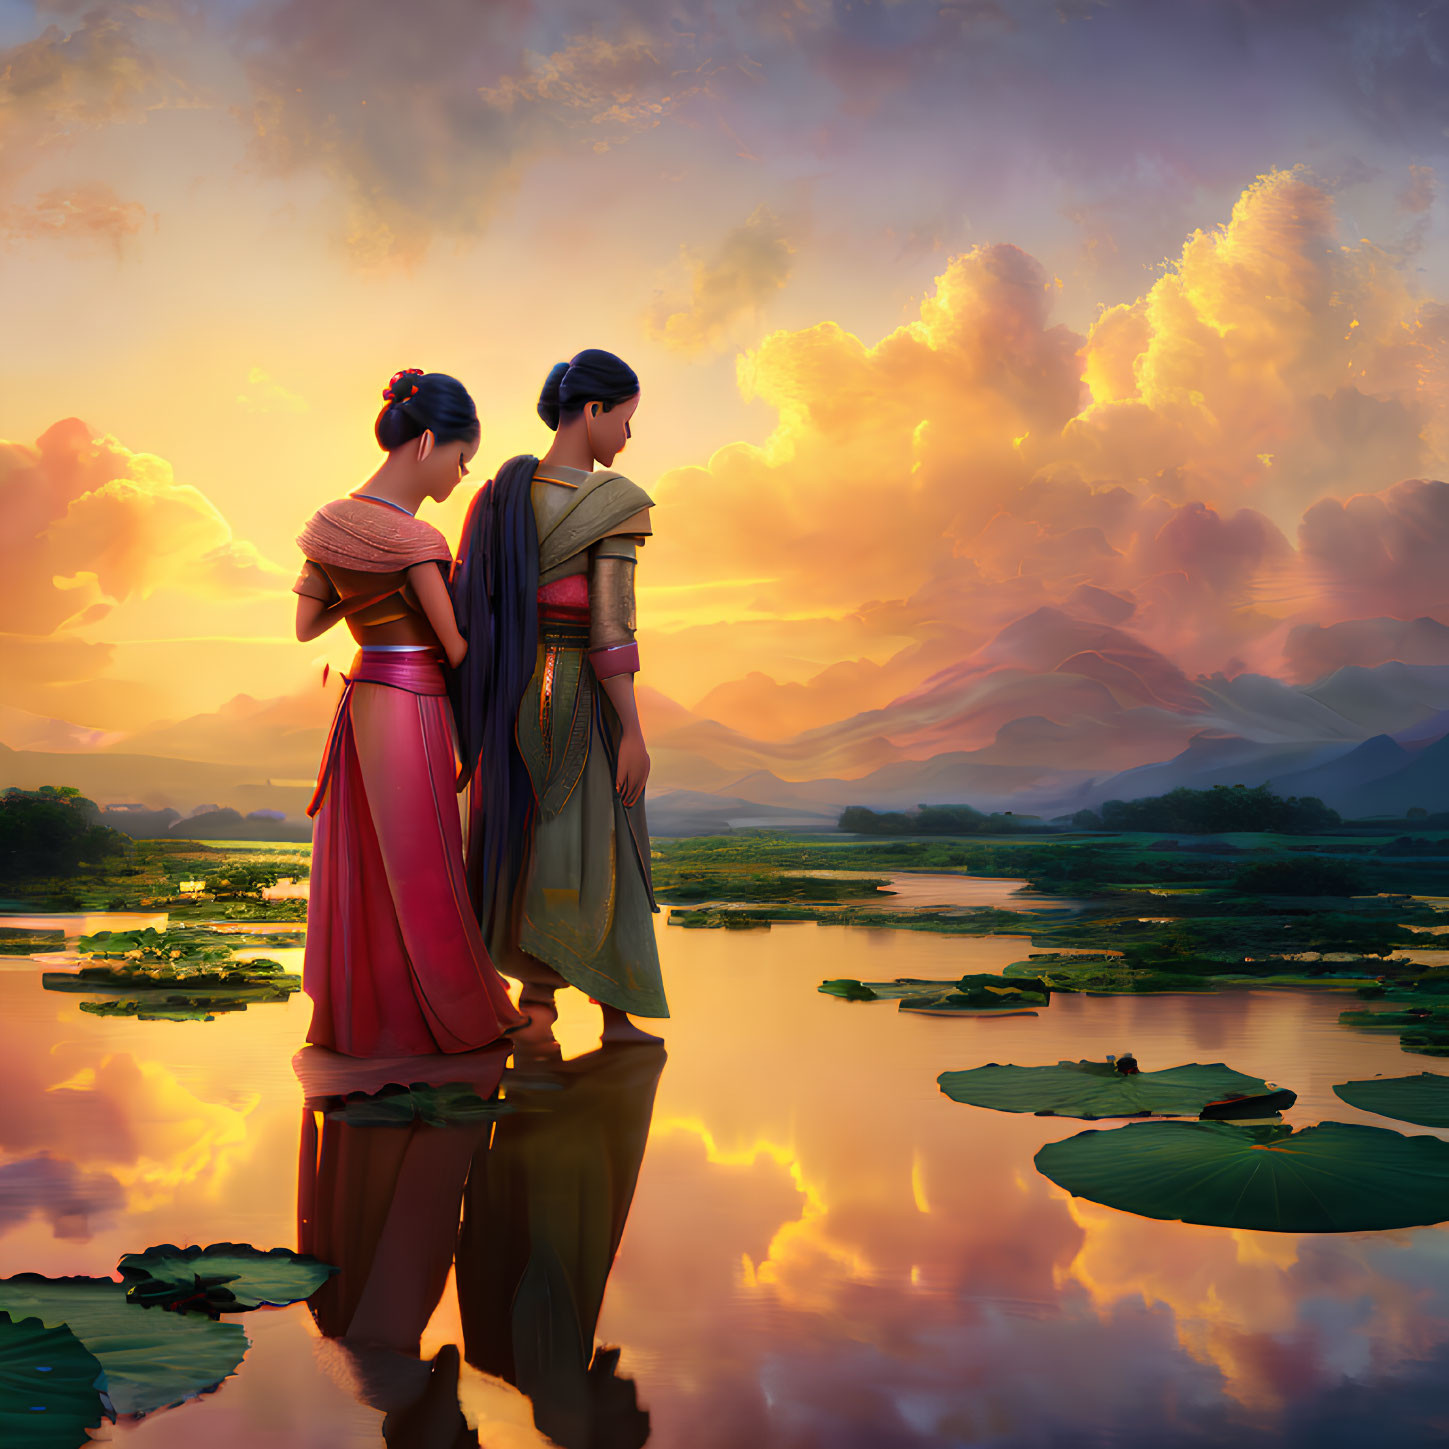 Traditional Attire Women by Lake at Sunset with Mountain Backdrop